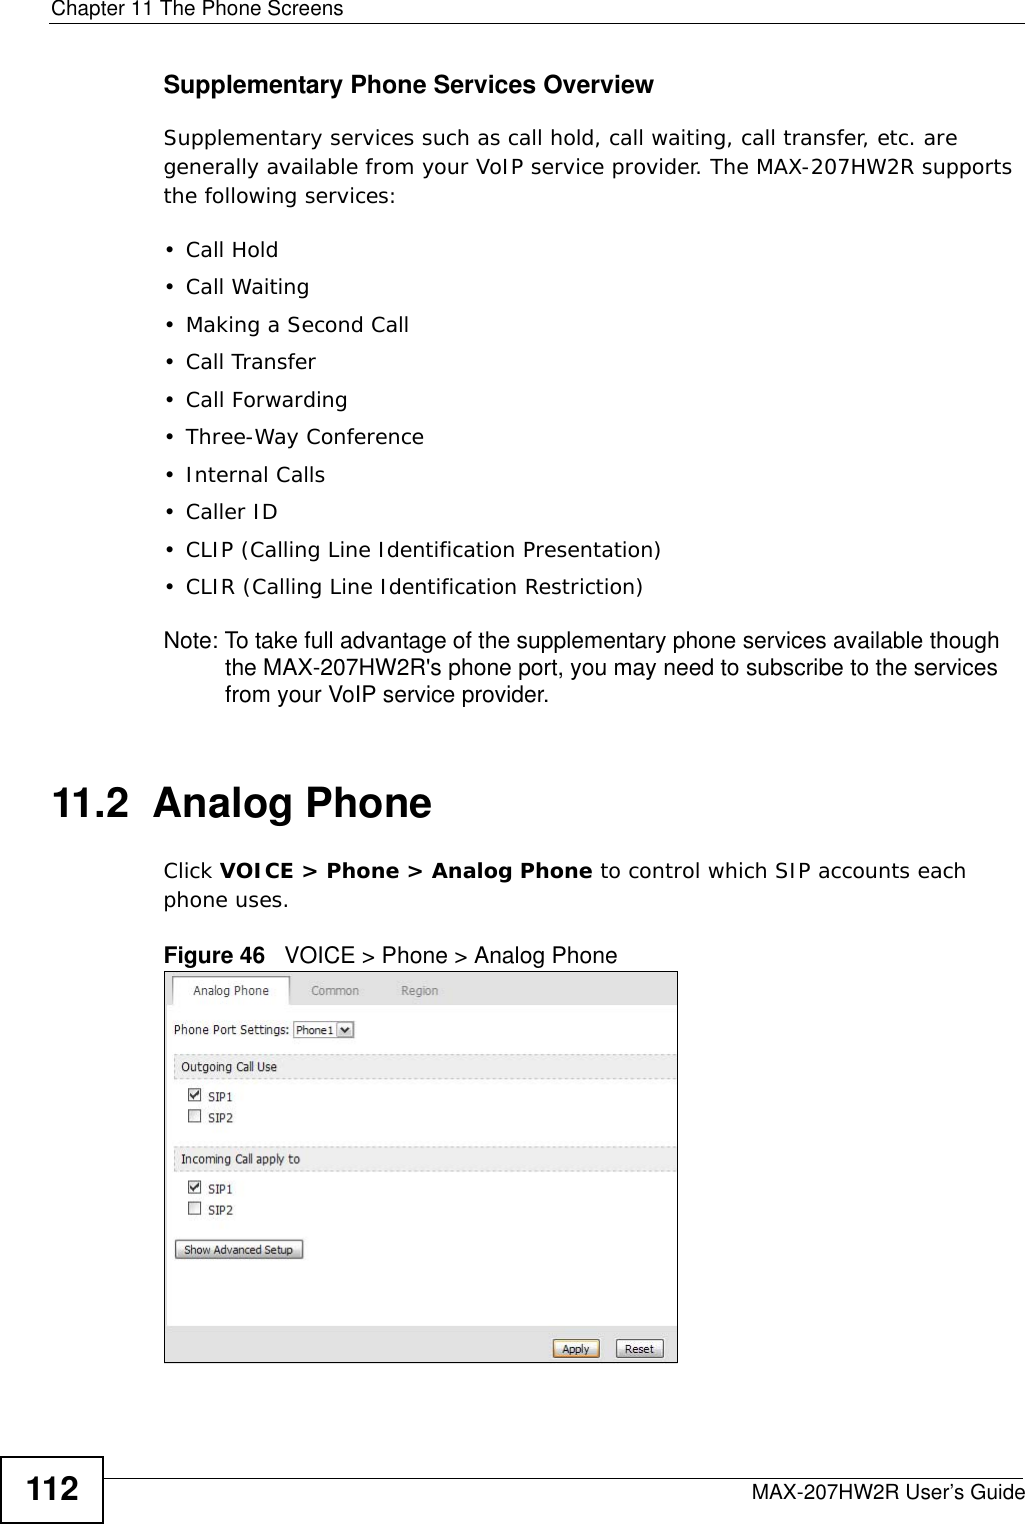 Chapter 11 The Phone ScreensMAX-207HW2R User’s Guide112Supplementary Phone Services OverviewSupplementary services such as call hold, call waiting, call transfer, etc. are generally available from your VoIP service provider. The MAX-207HW2R supports the following services:• Call Hold• Call Waiting• Making a Second Call• Call Transfer• Call Forwarding• Three-Way Conference•Internal Calls• Caller ID• CLIP (Calling Line Identification Presentation)• CLIR (Calling Line Identification Restriction)Note: To take full advantage of the supplementary phone services available though the MAX-207HW2R&apos;s phone port, you may need to subscribe to the services from your VoIP service provider.11.2  Analog PhoneClick VOICE &gt; Phone &gt; Analog Phone to control which SIP accounts each phone uses.Figure 46   VOICE &gt; Phone &gt; Analog Phone